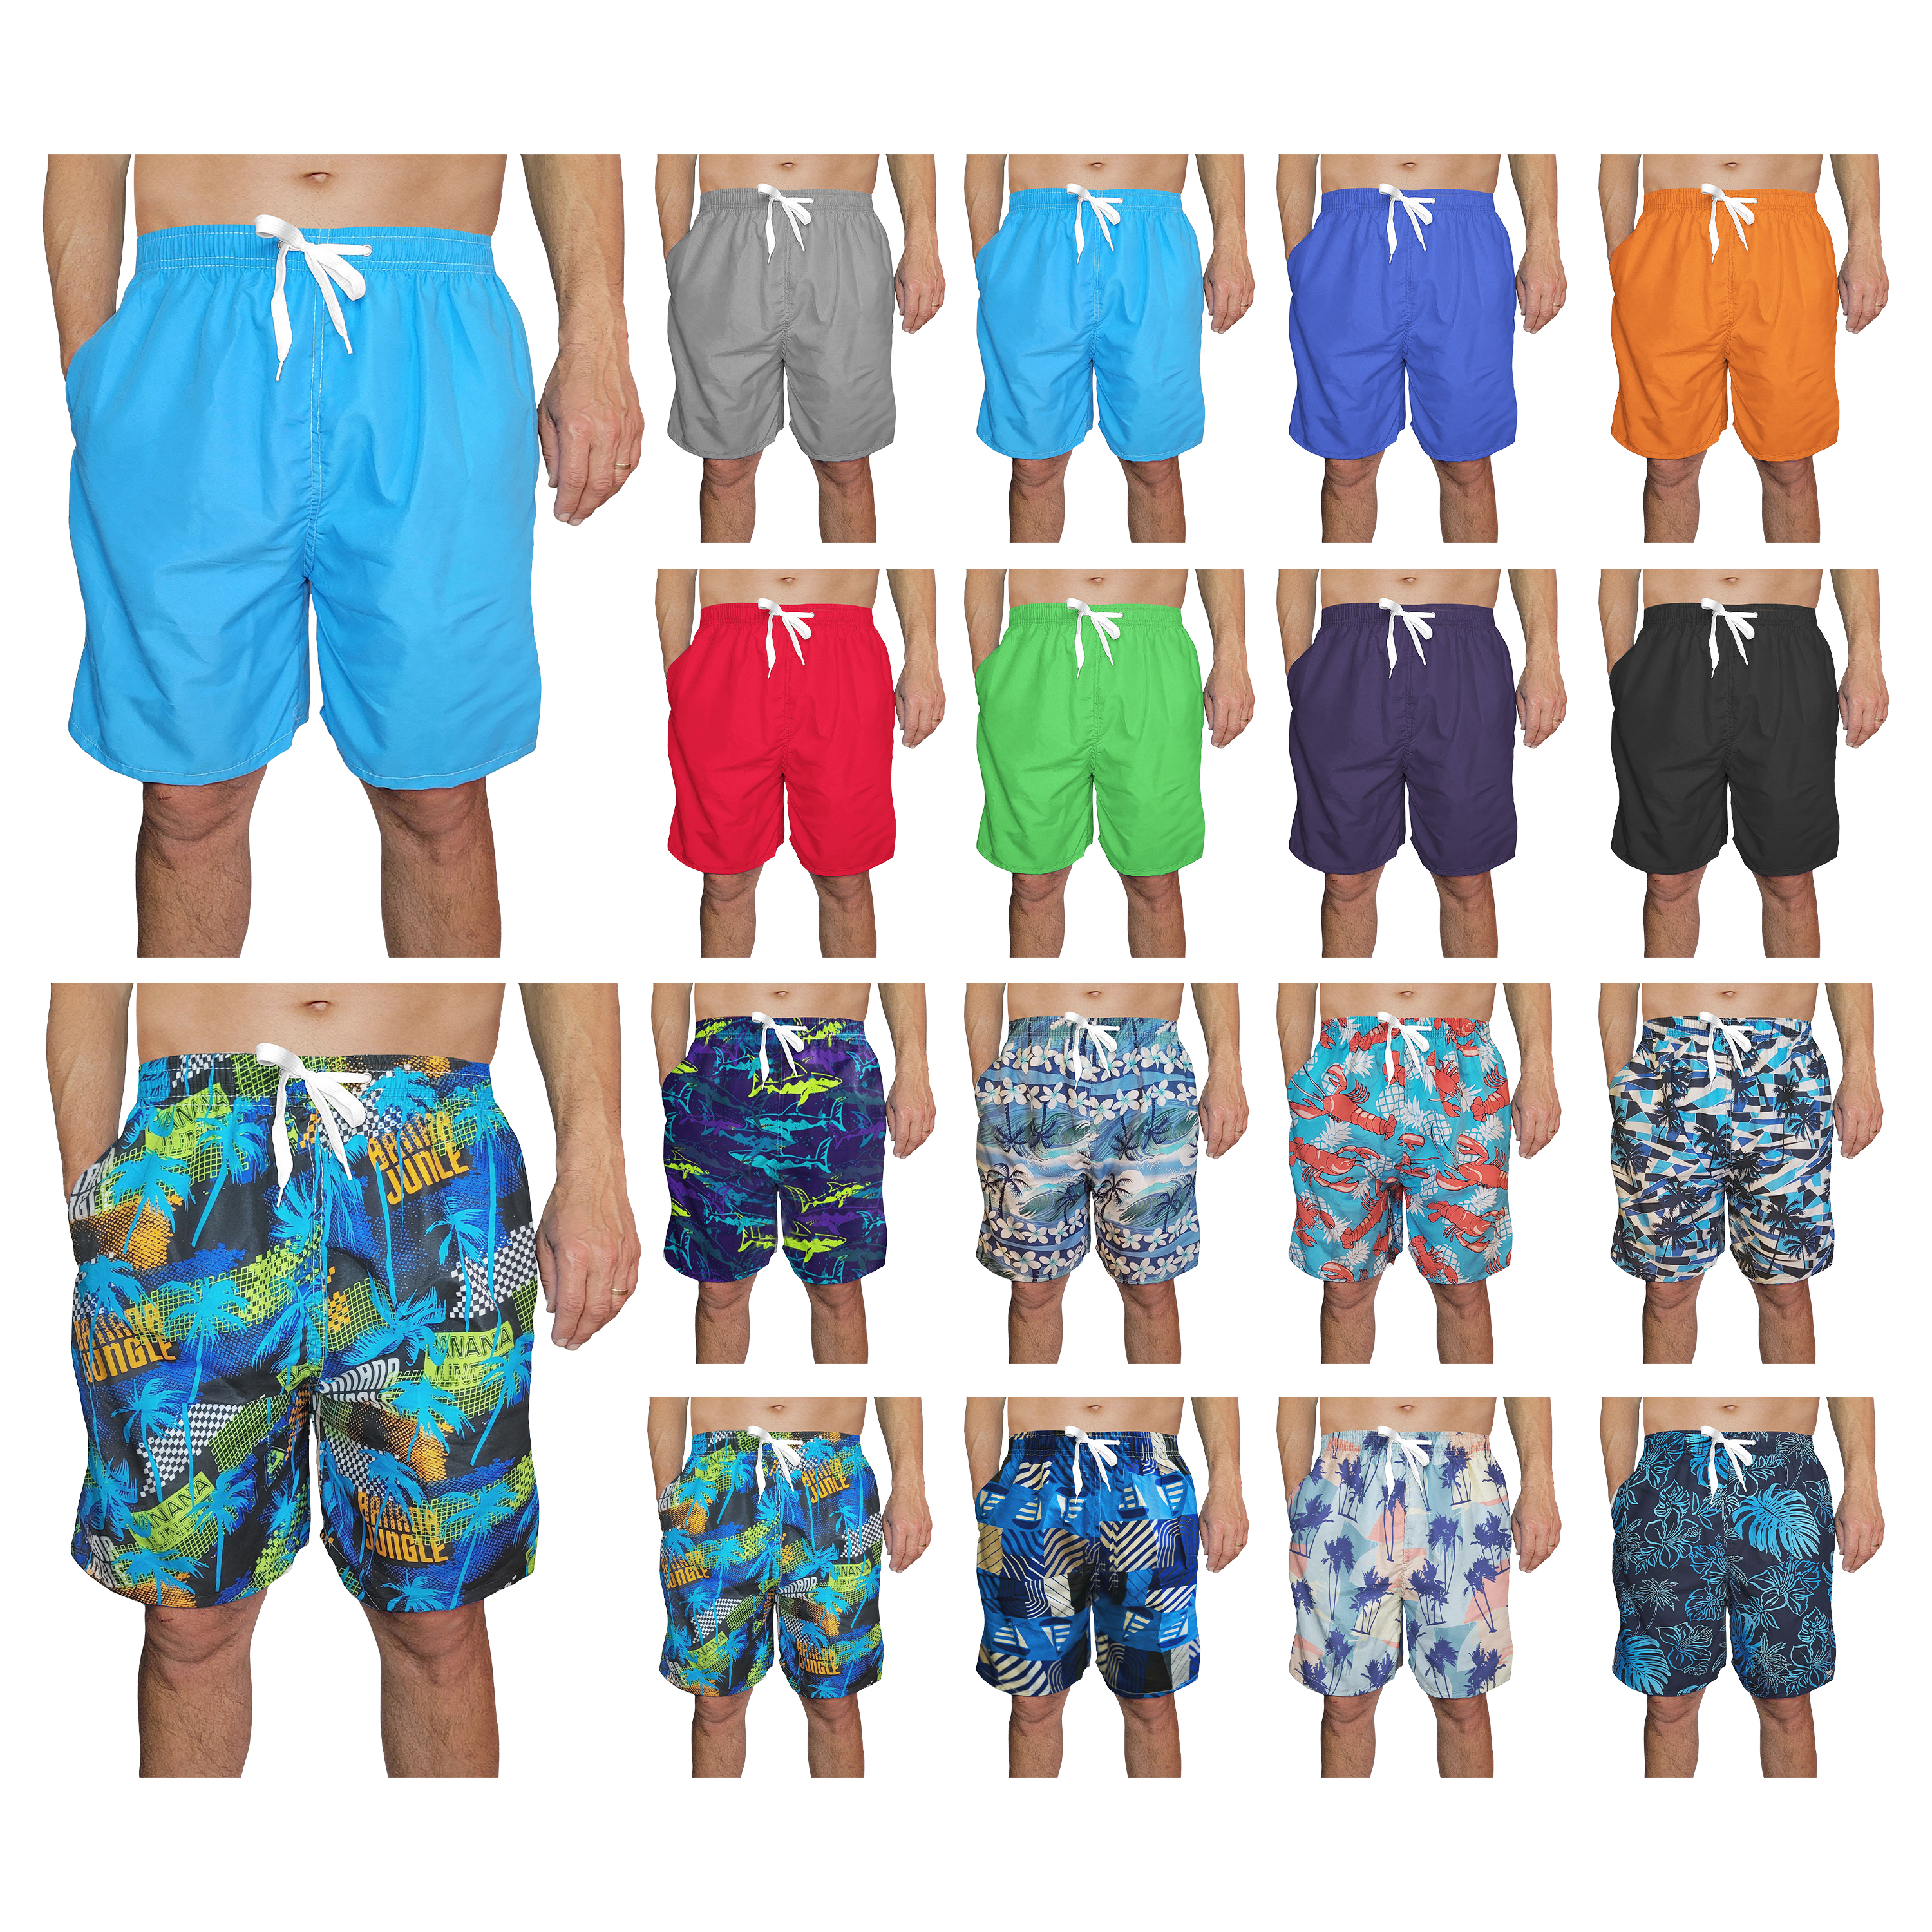 3-Pack: Men's Quick-Dry Solid & Printed Summer Beach Surf Board Swim Trunks Shorts - Large, Printed